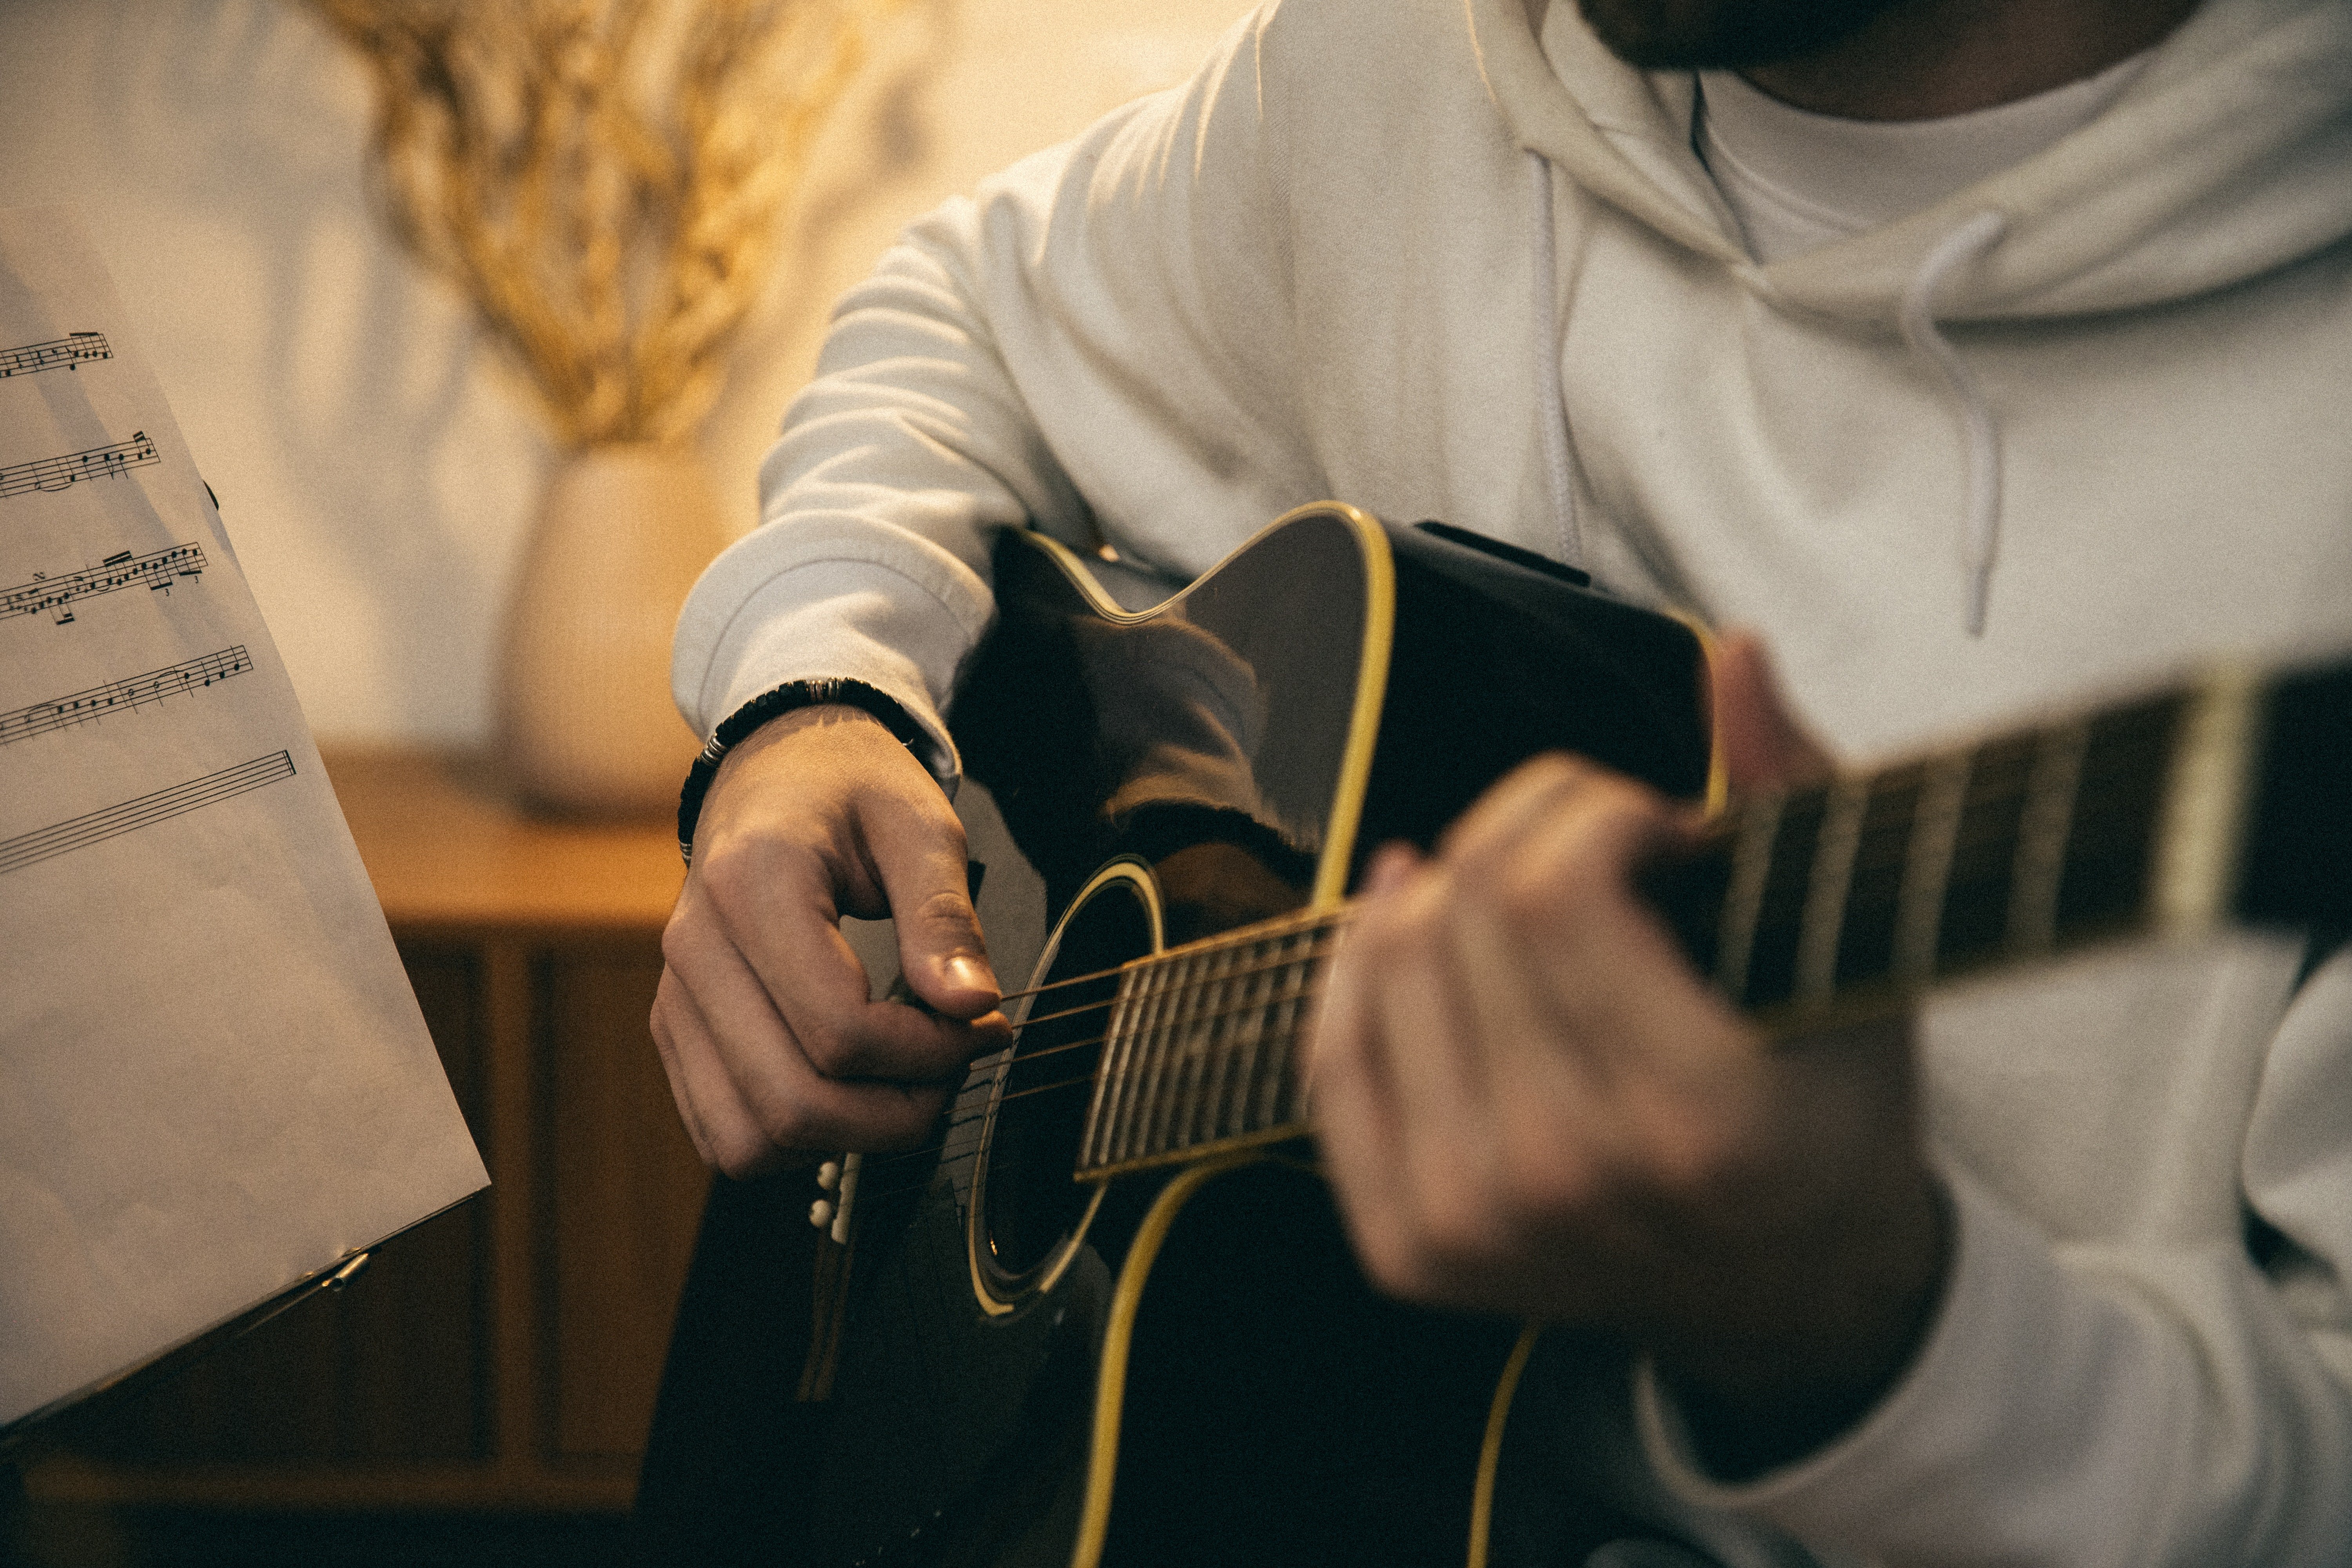 Caleb wanted to make a career out of music. | Source: Pexels